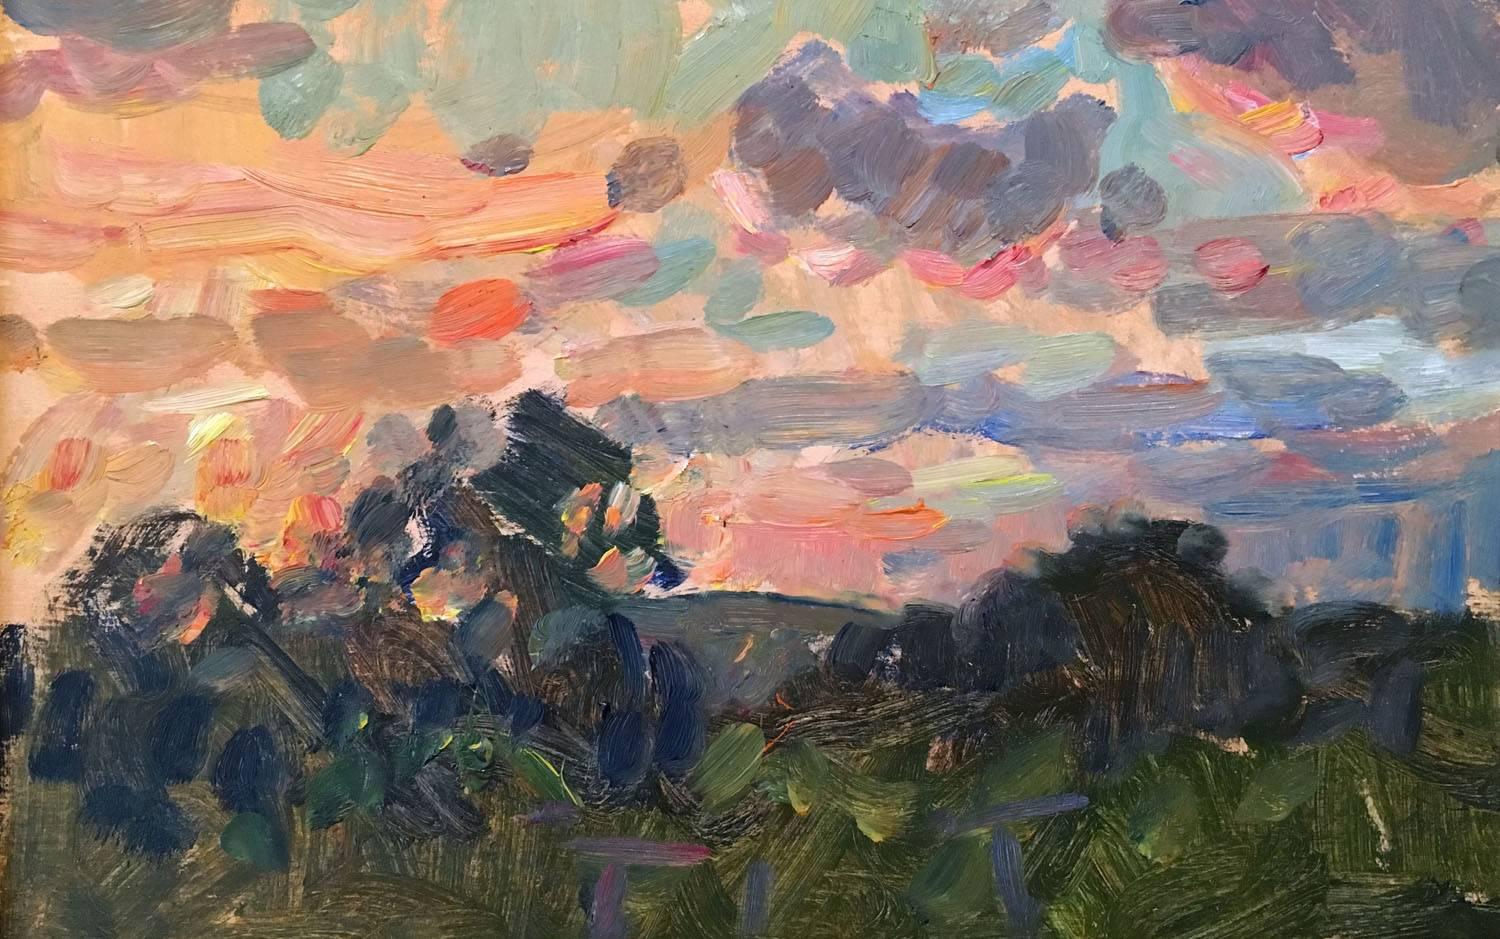 Ben Fenske Landscape Painting - "Sunset Sketch" 2016 small study for larger oil painting composition Italy 